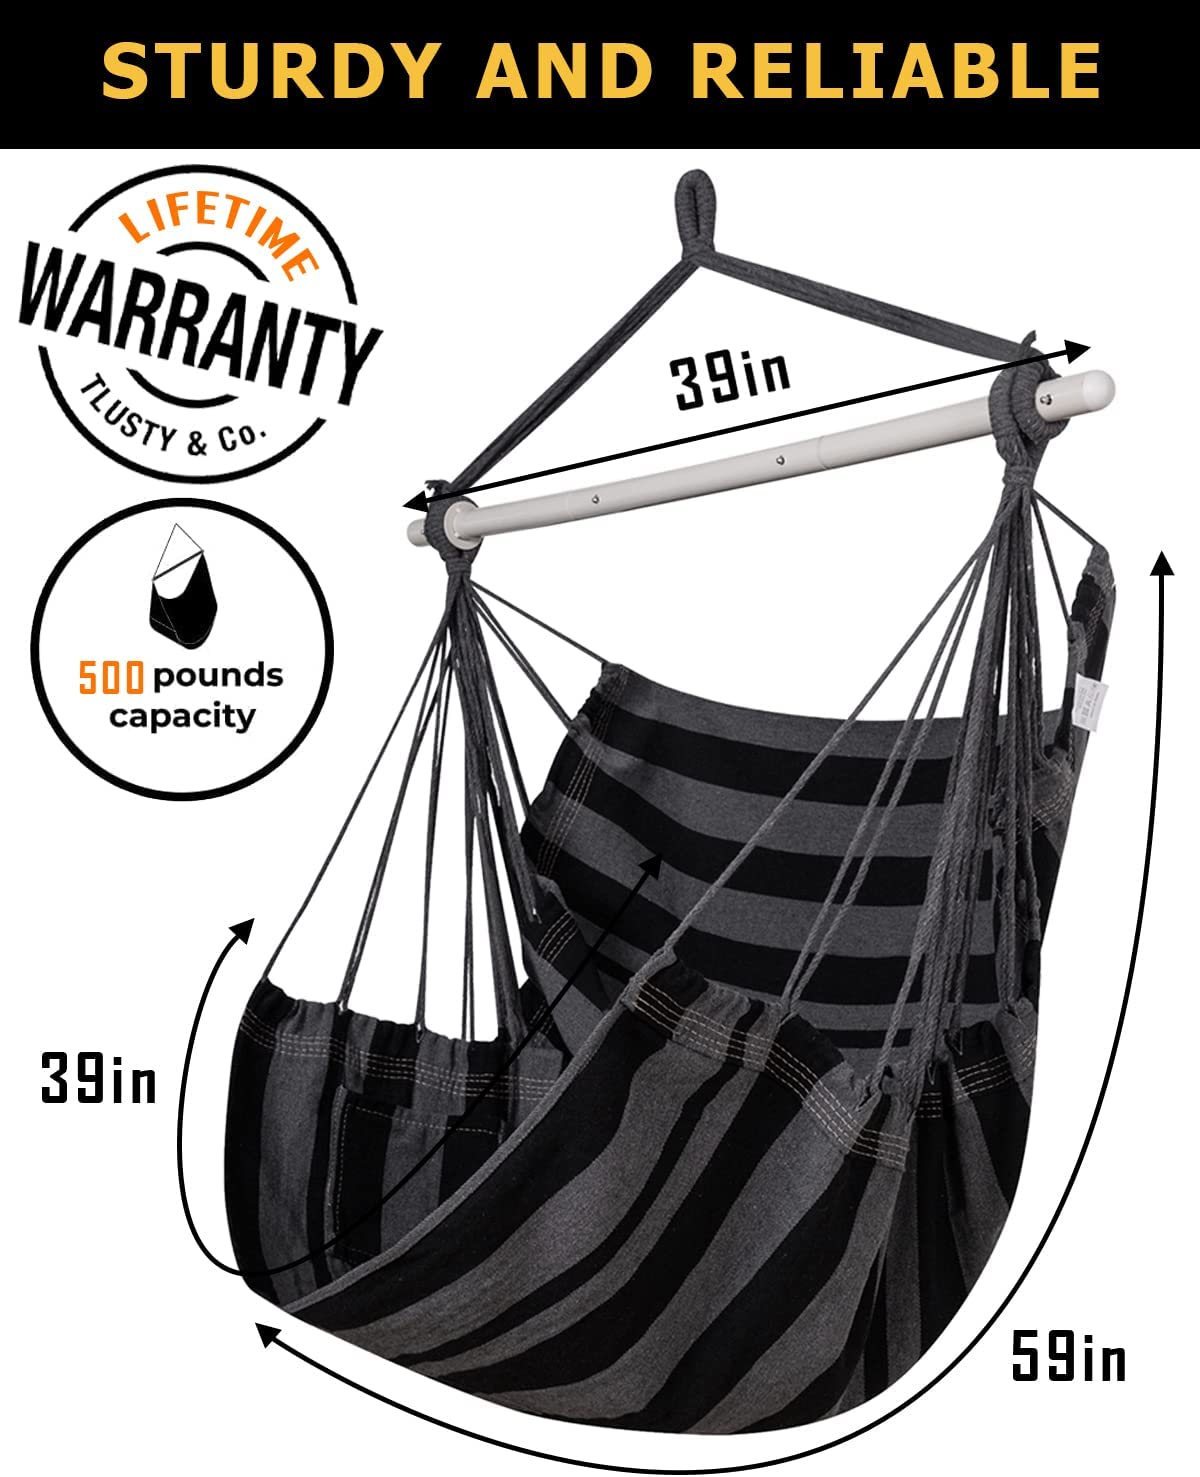 ADVOKAIR Hanging Hammock Chair Large Swing Chair with Foot Rest and Ha